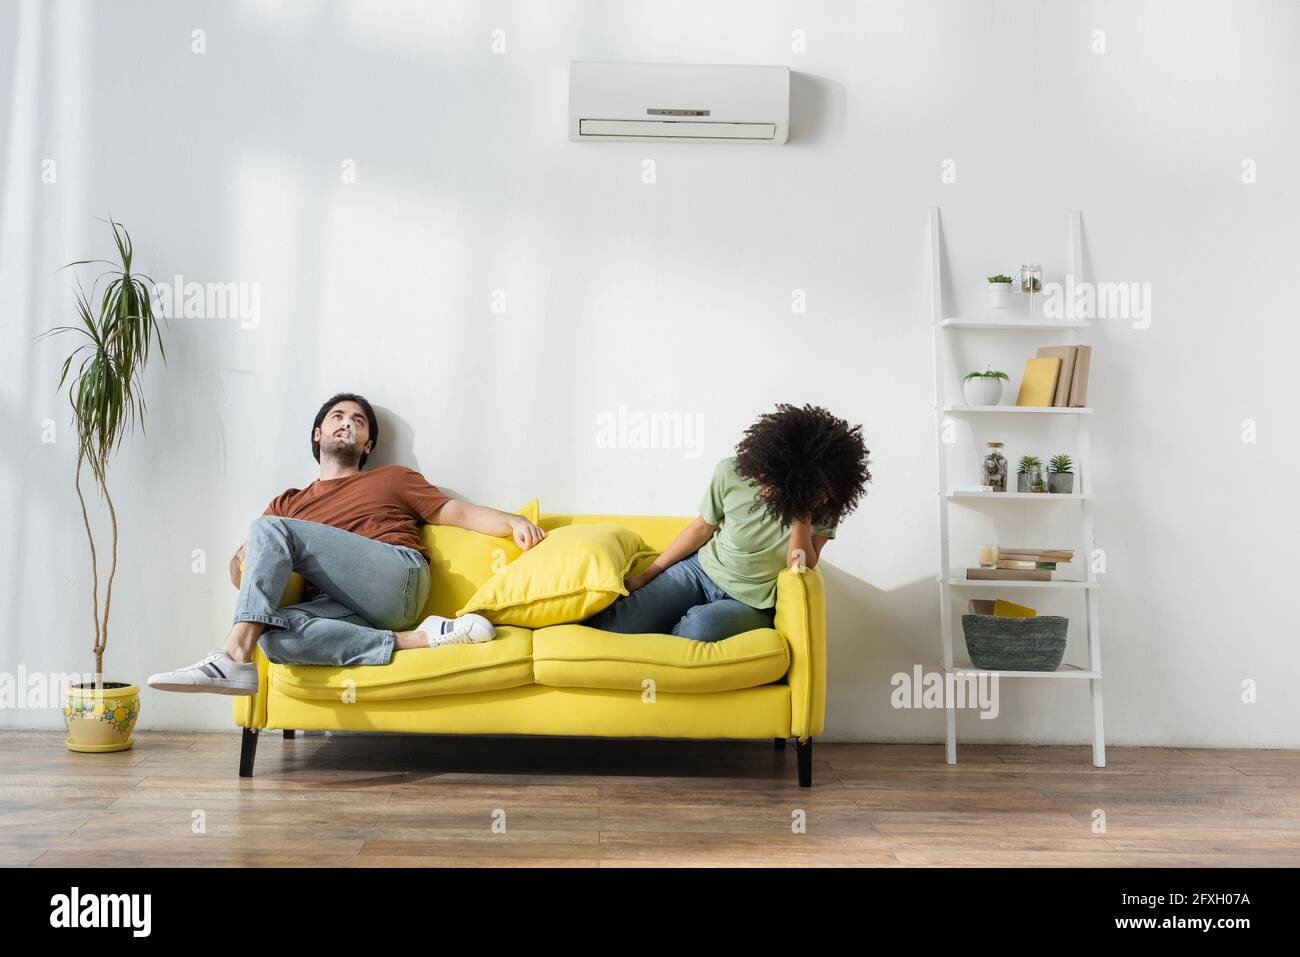 exhausted interracial couple sitting on sofa and suffering from heat in summer Stock Photo